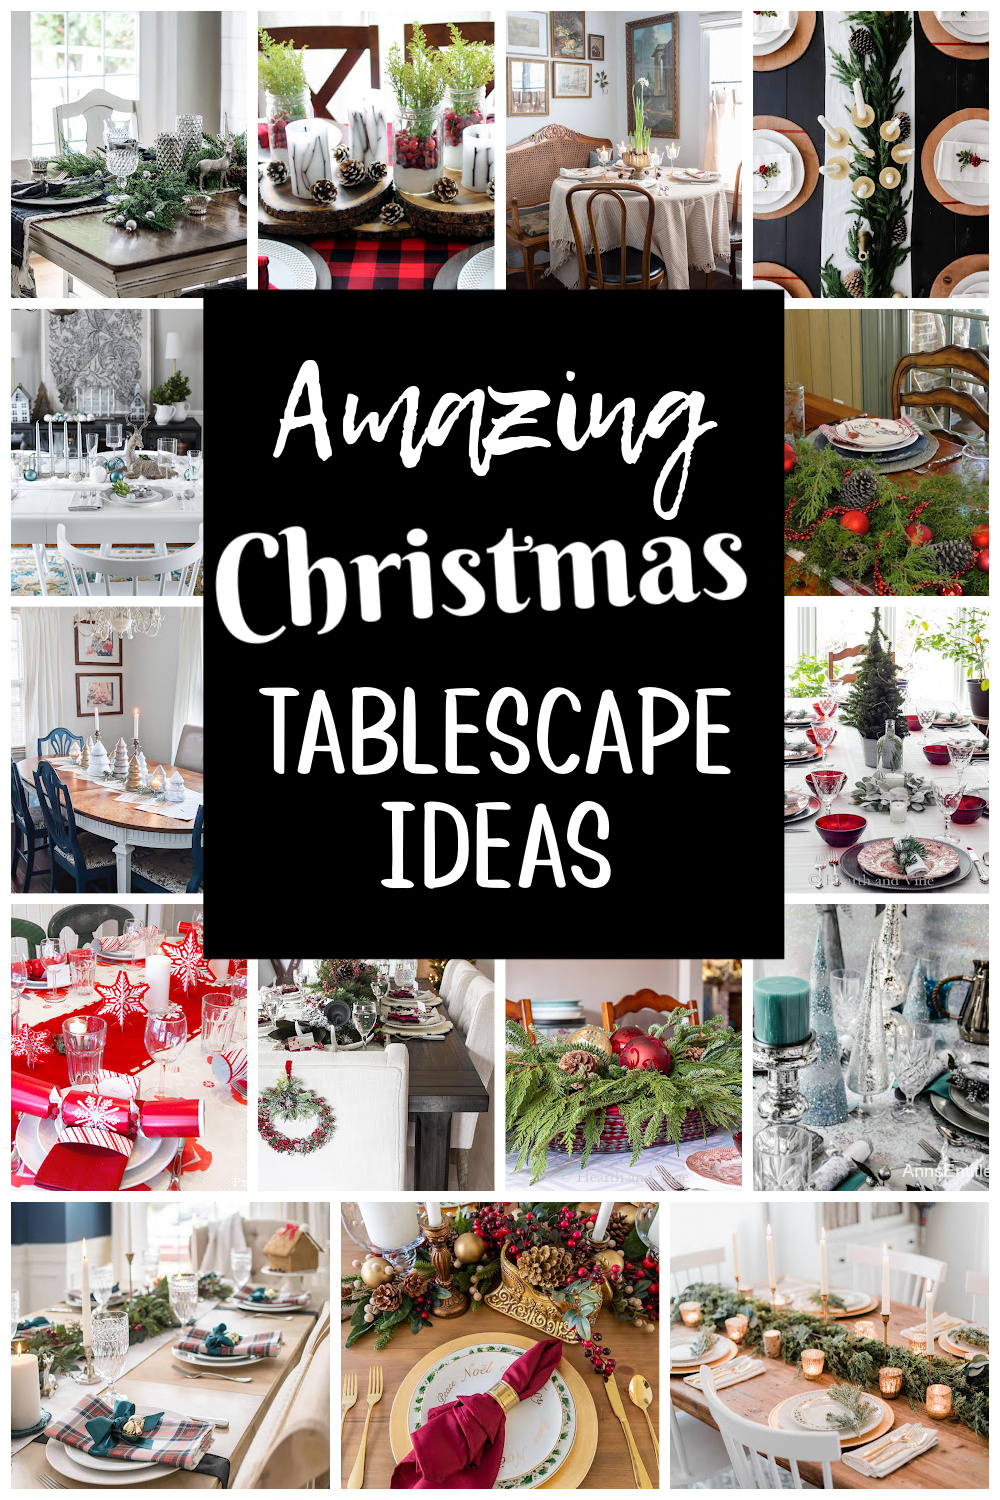 A large collection of Christmas tablescapes in a variety of styles and colors.